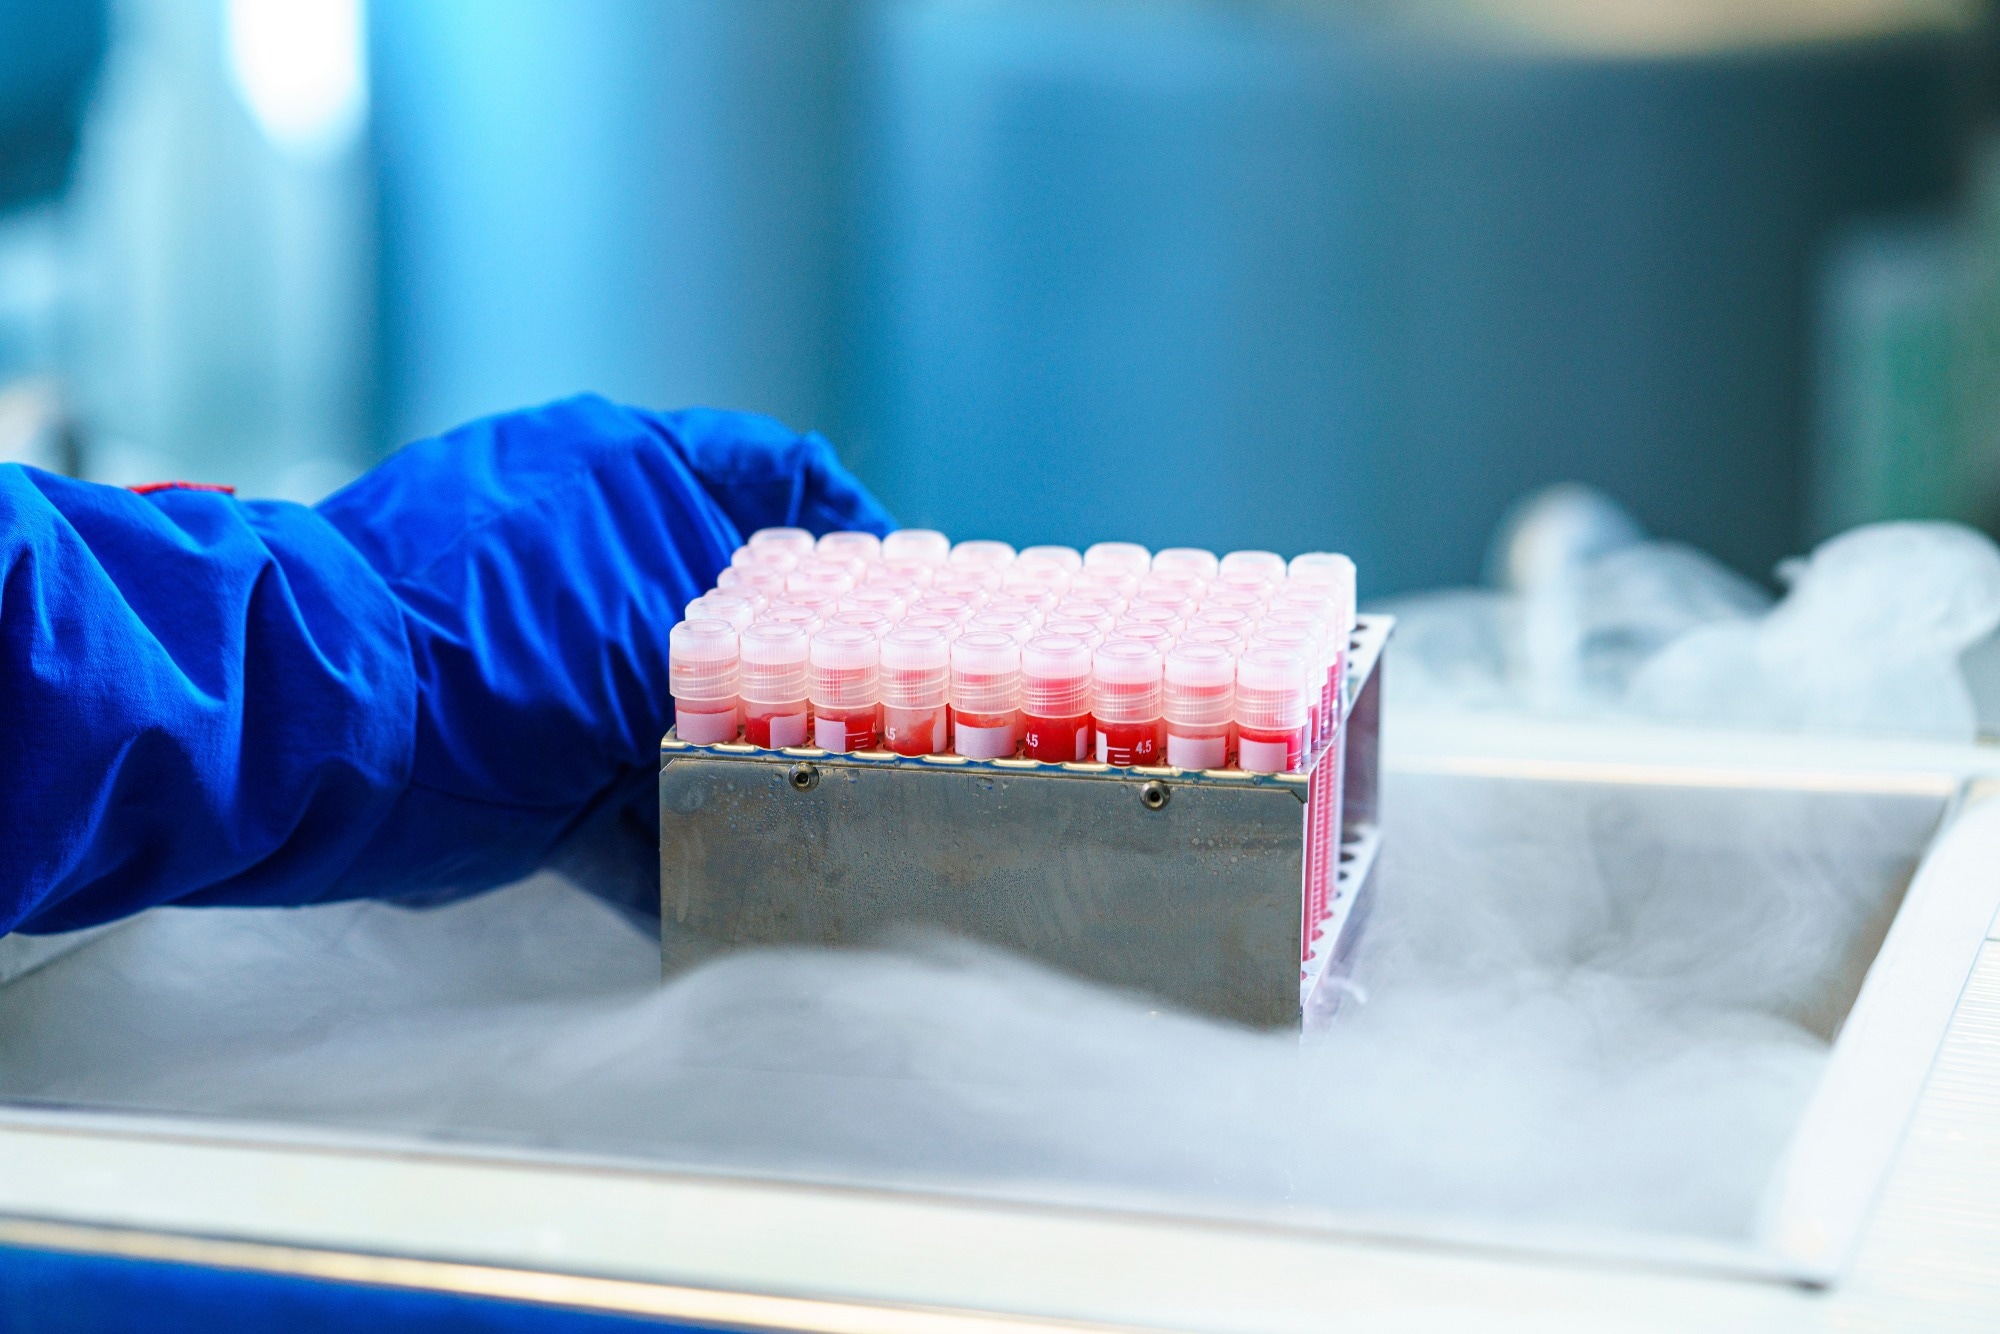 Study: Validation of a SARS-CoV-2 RT-PCR assay: a requirement to evaluate viral contamination in human semen. Image Credit: Leonidovich/Shutterstock